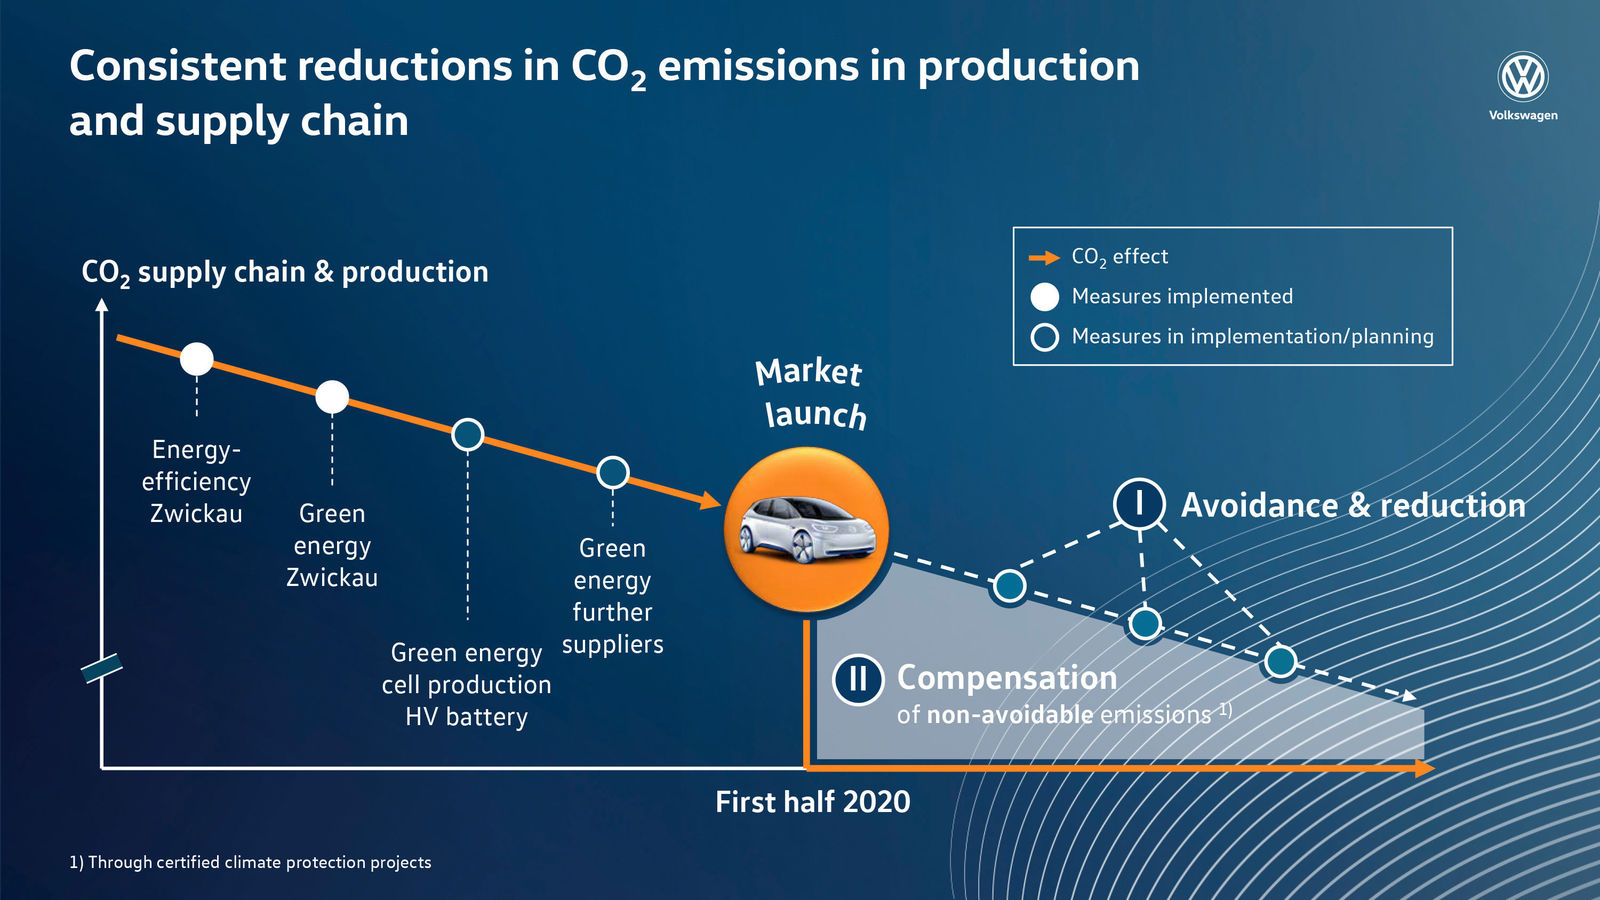 Consistent reductions in CO2 emissions in production and supply chain